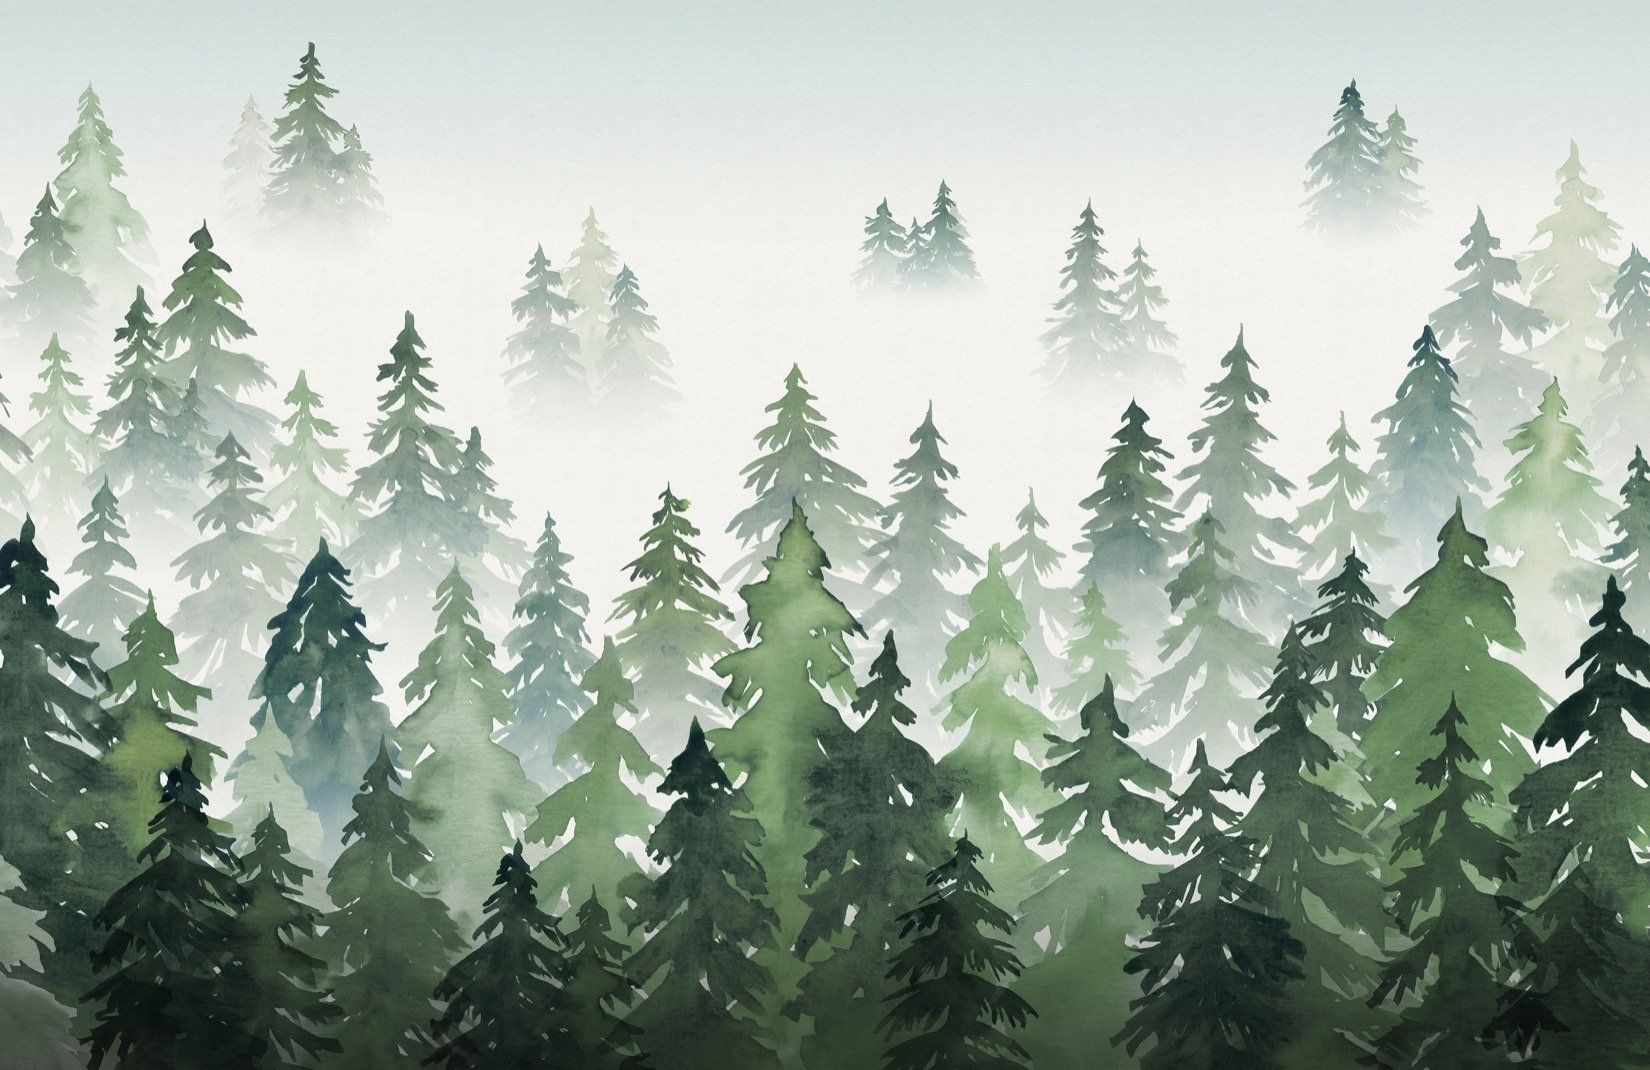 Tree Silhouette Wallpaper. Watercolour Forest Style